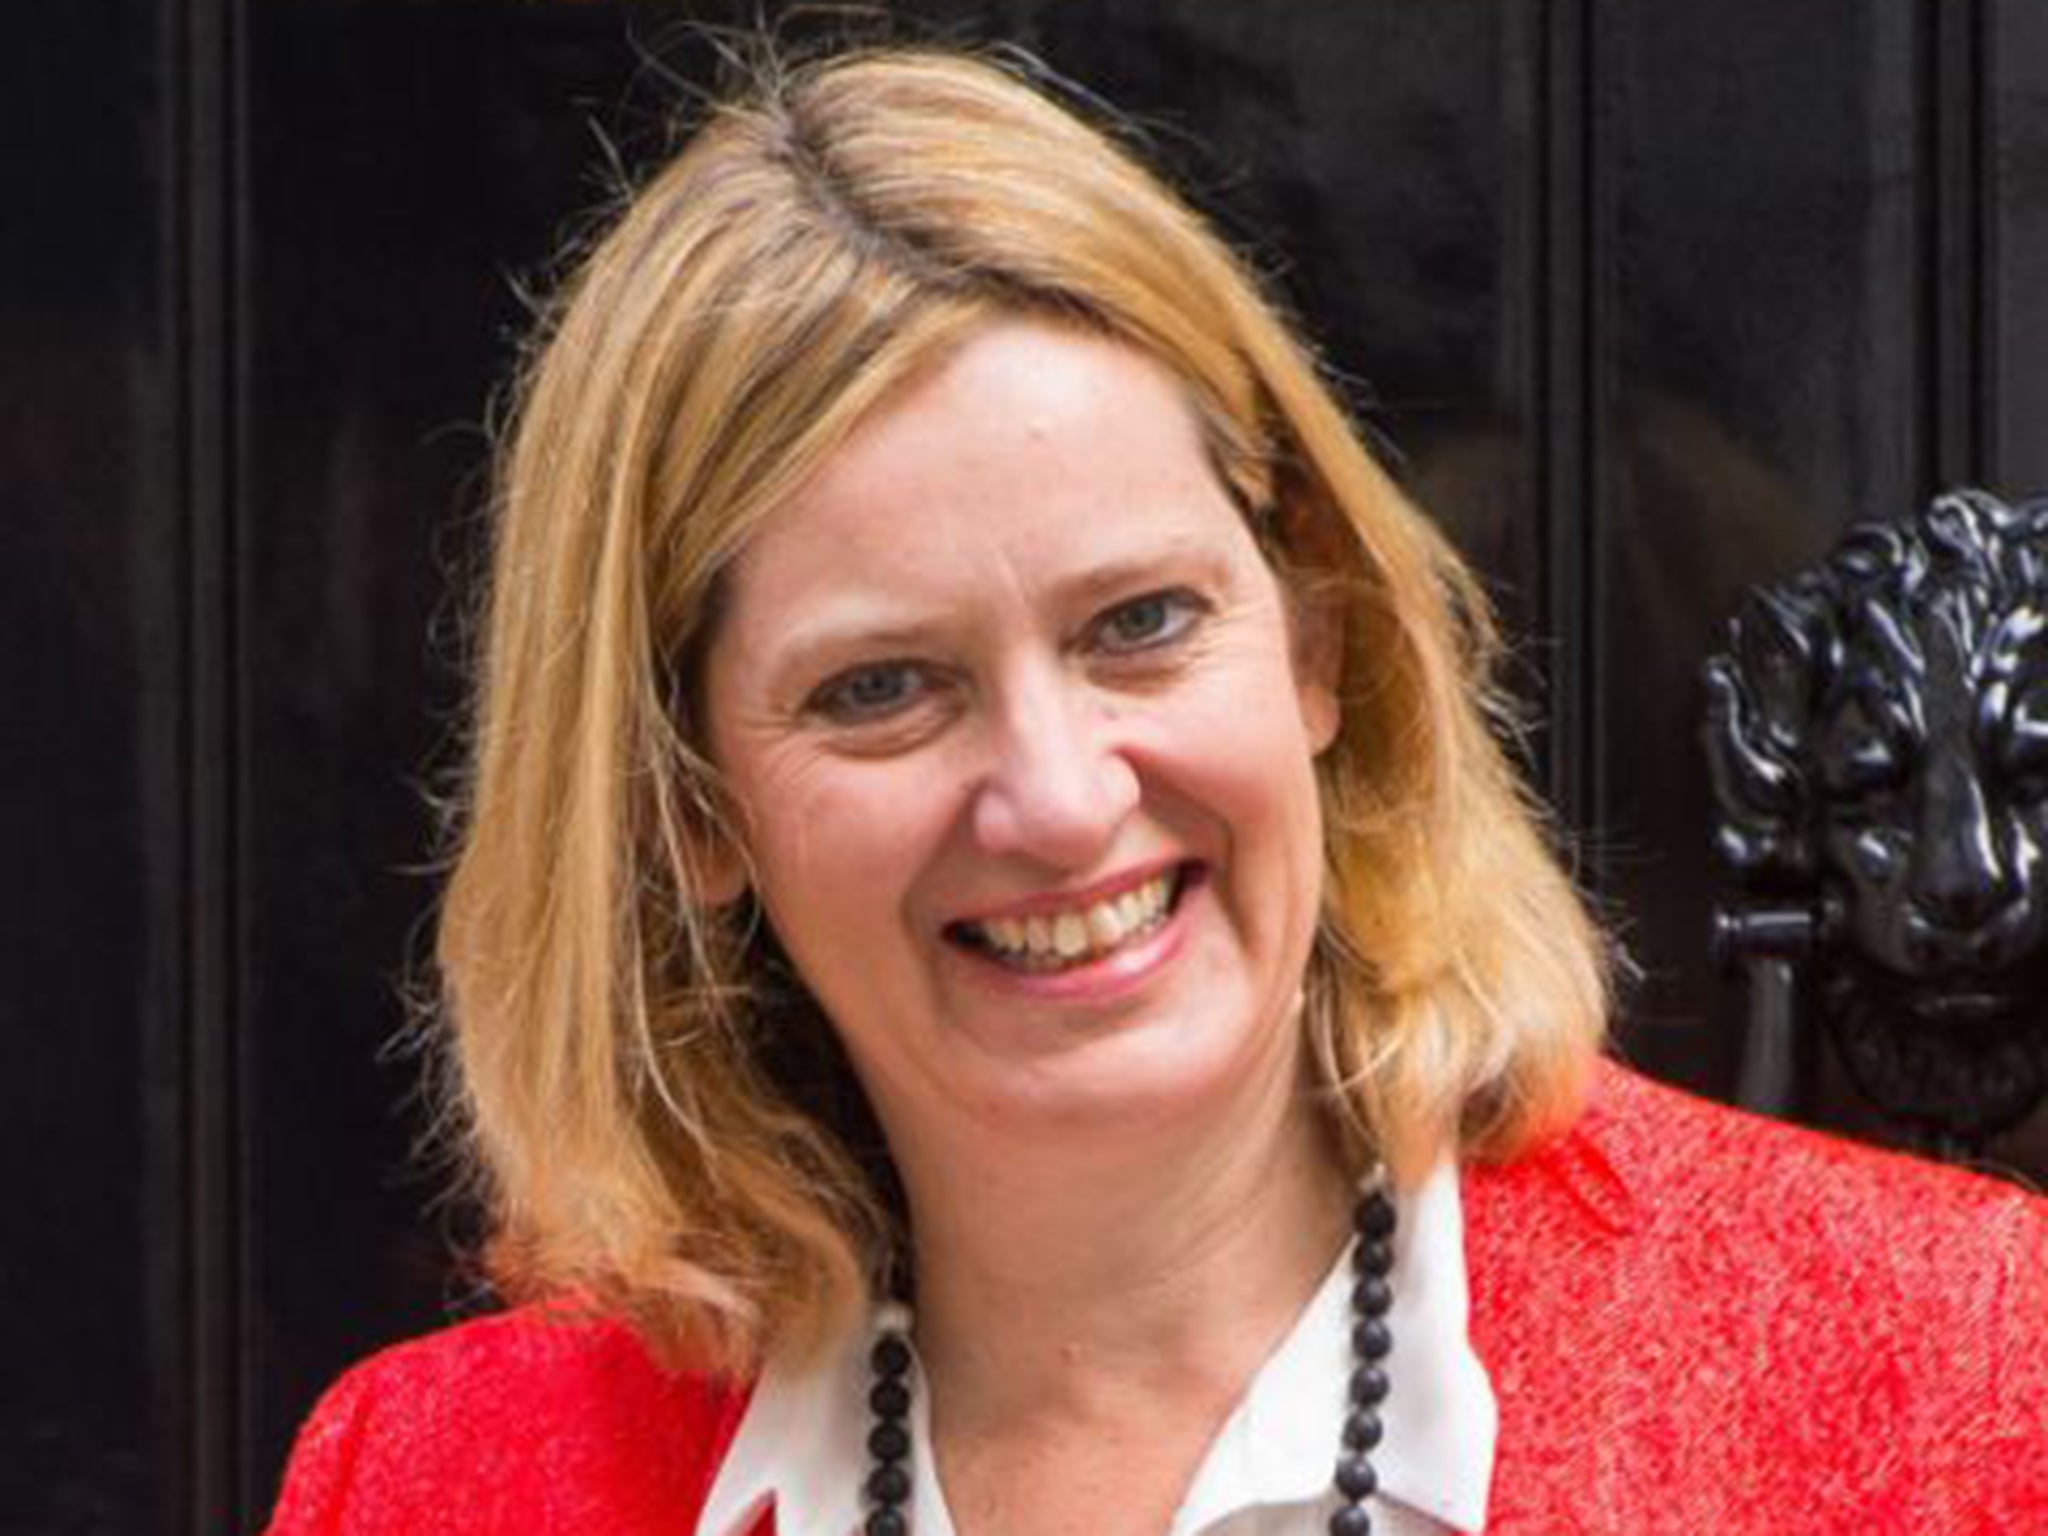 Amber Rudd was appointed as Secretary of State for Energy and Climate Change in David Cameron's new Cabinet